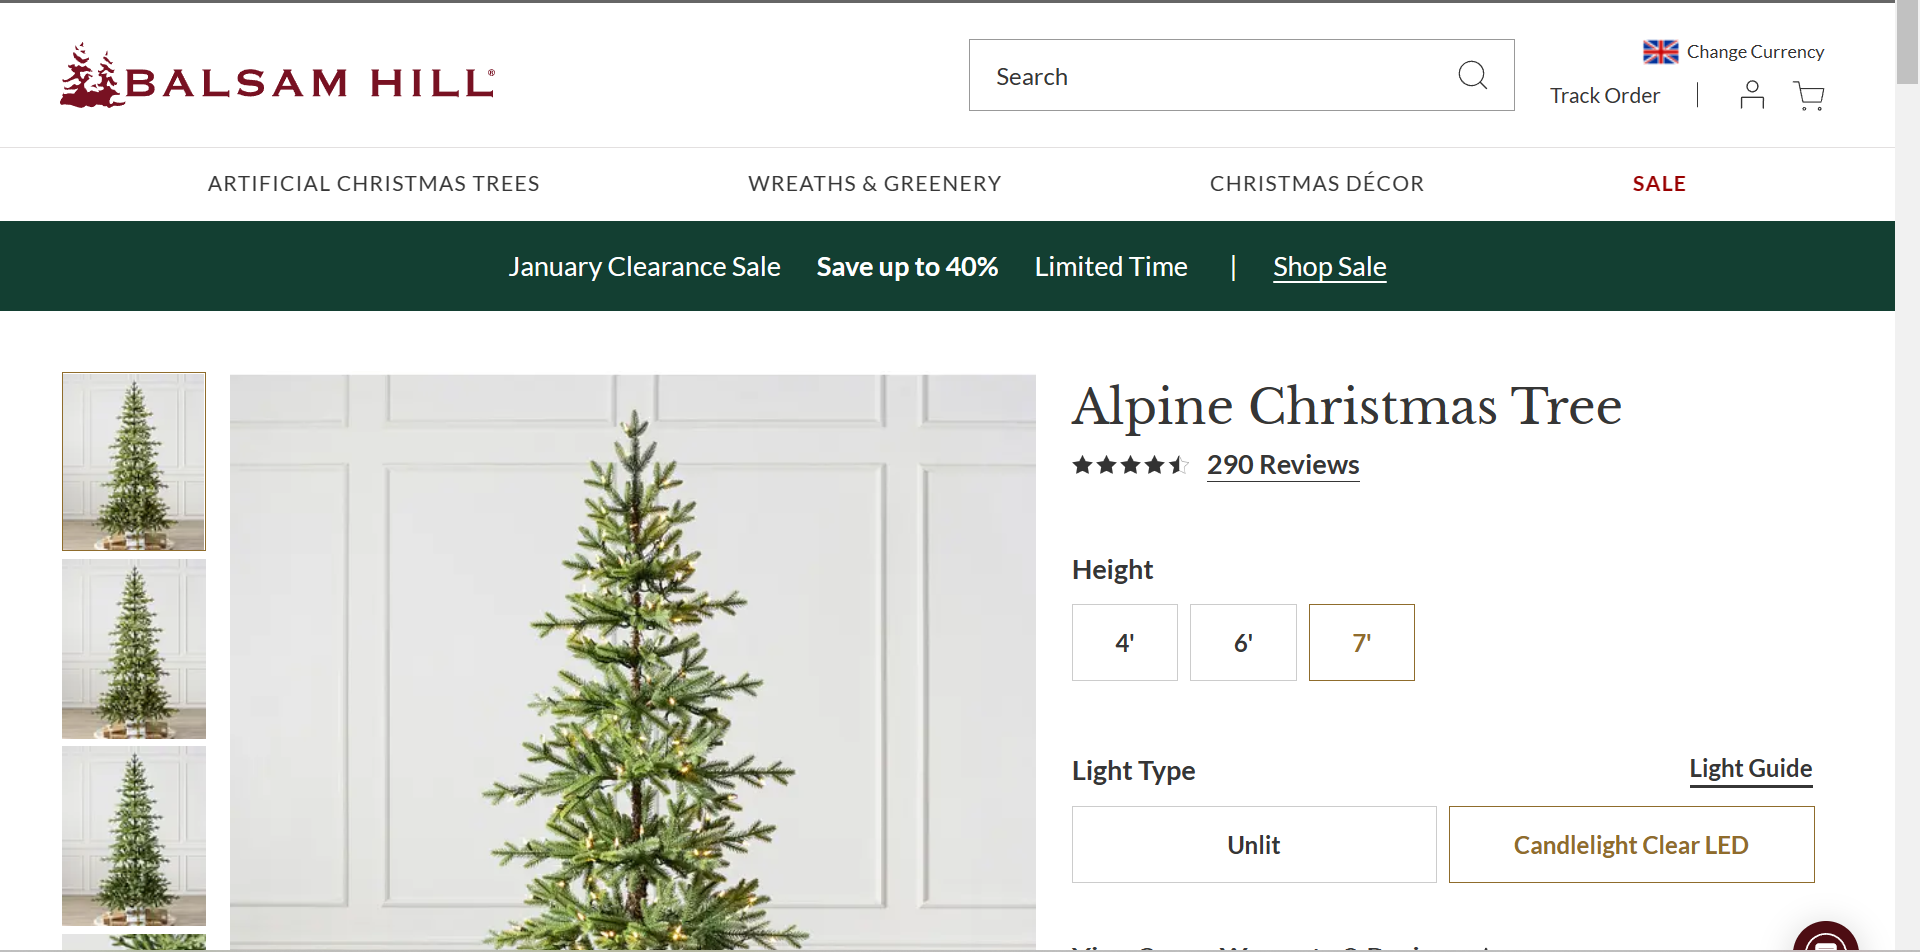 BH (The worlds leading Christmas Trees) Alpine Christmas Tree 4ft with LED Clear Lights. RRP £309. - Image 2 of 2